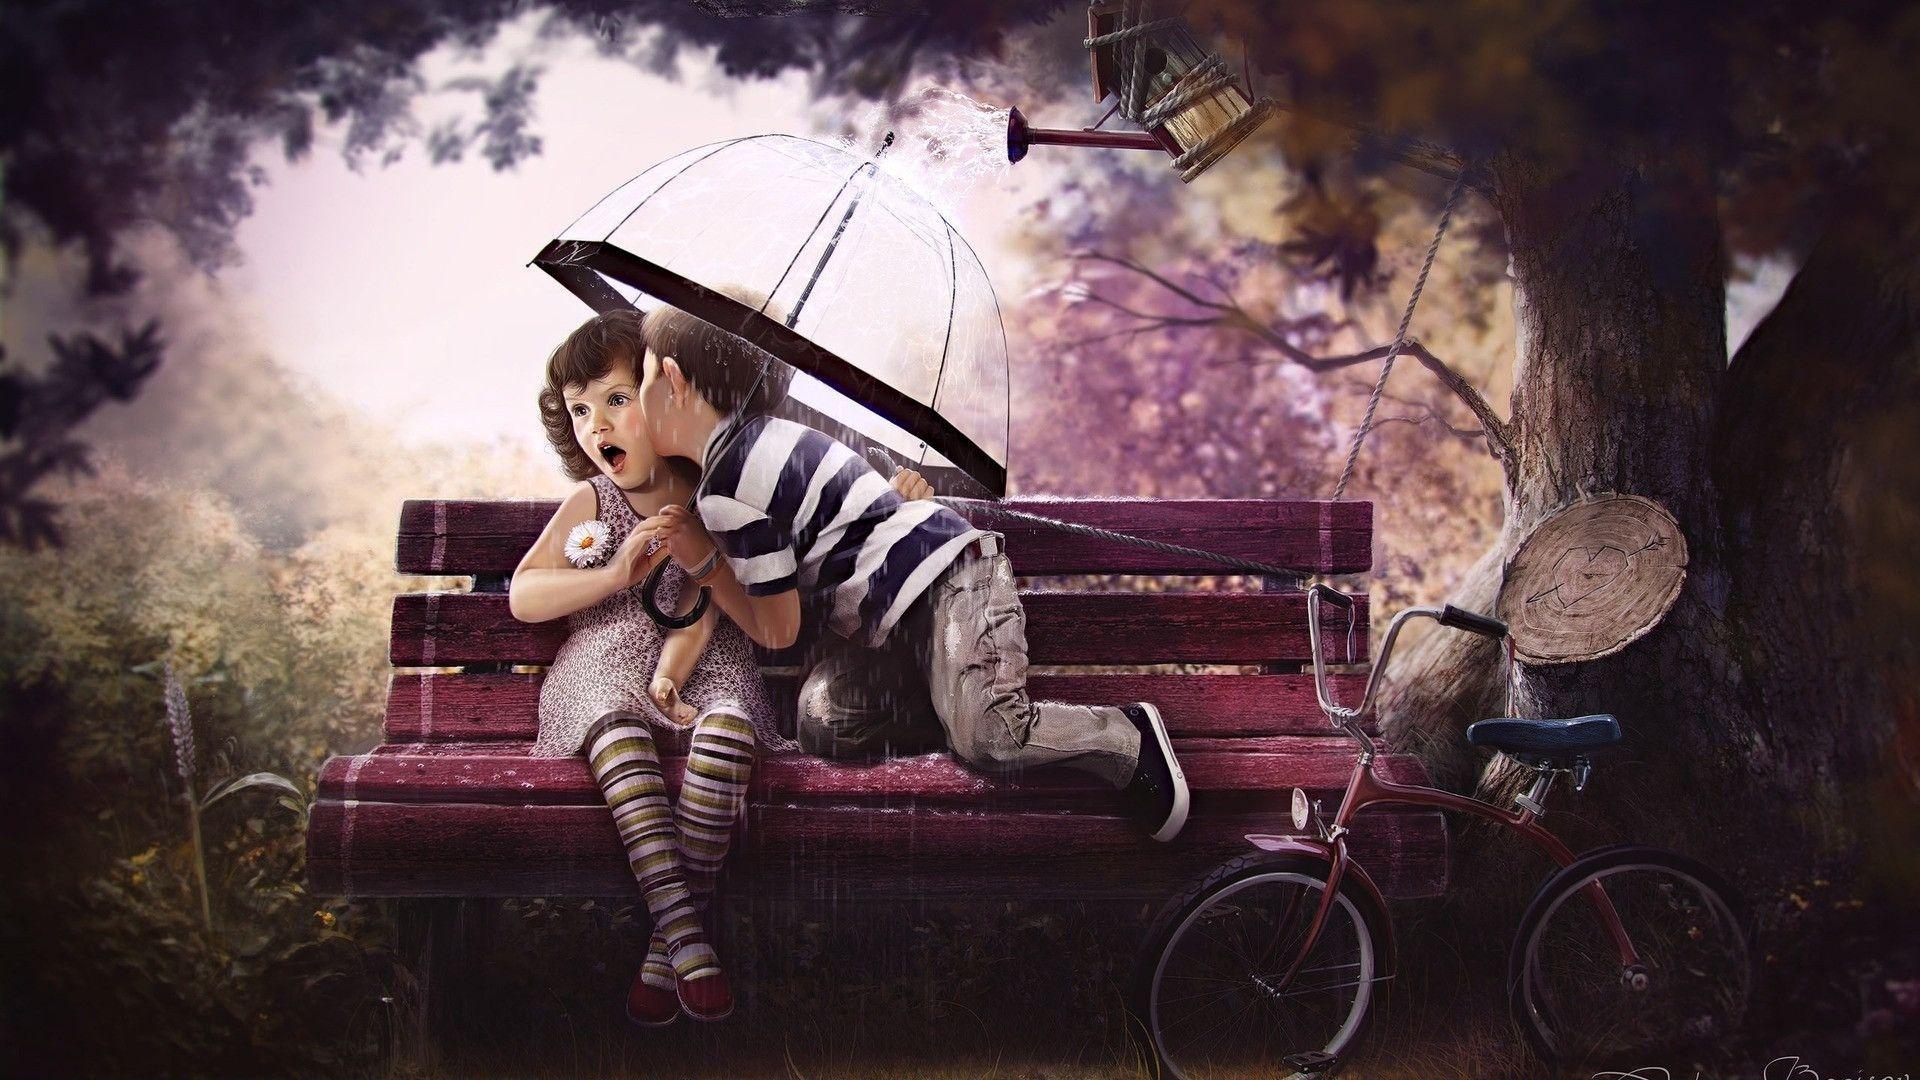 Boy and girl. Love. picture and wallpaper for desktop. Love